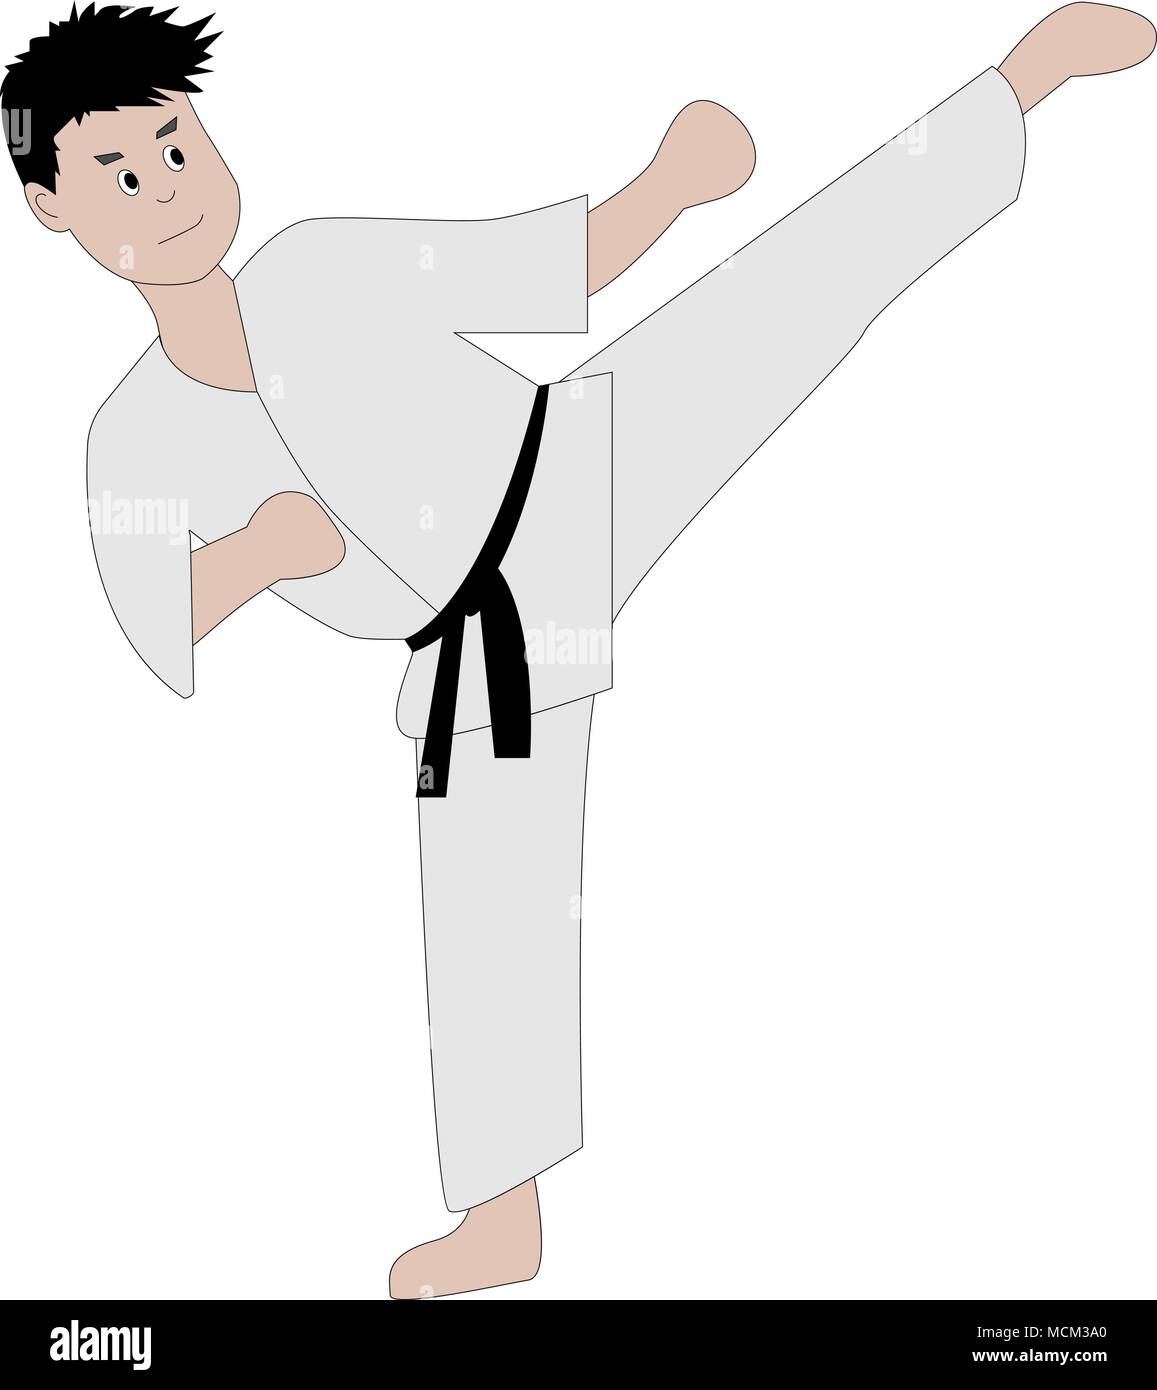 real karate moves